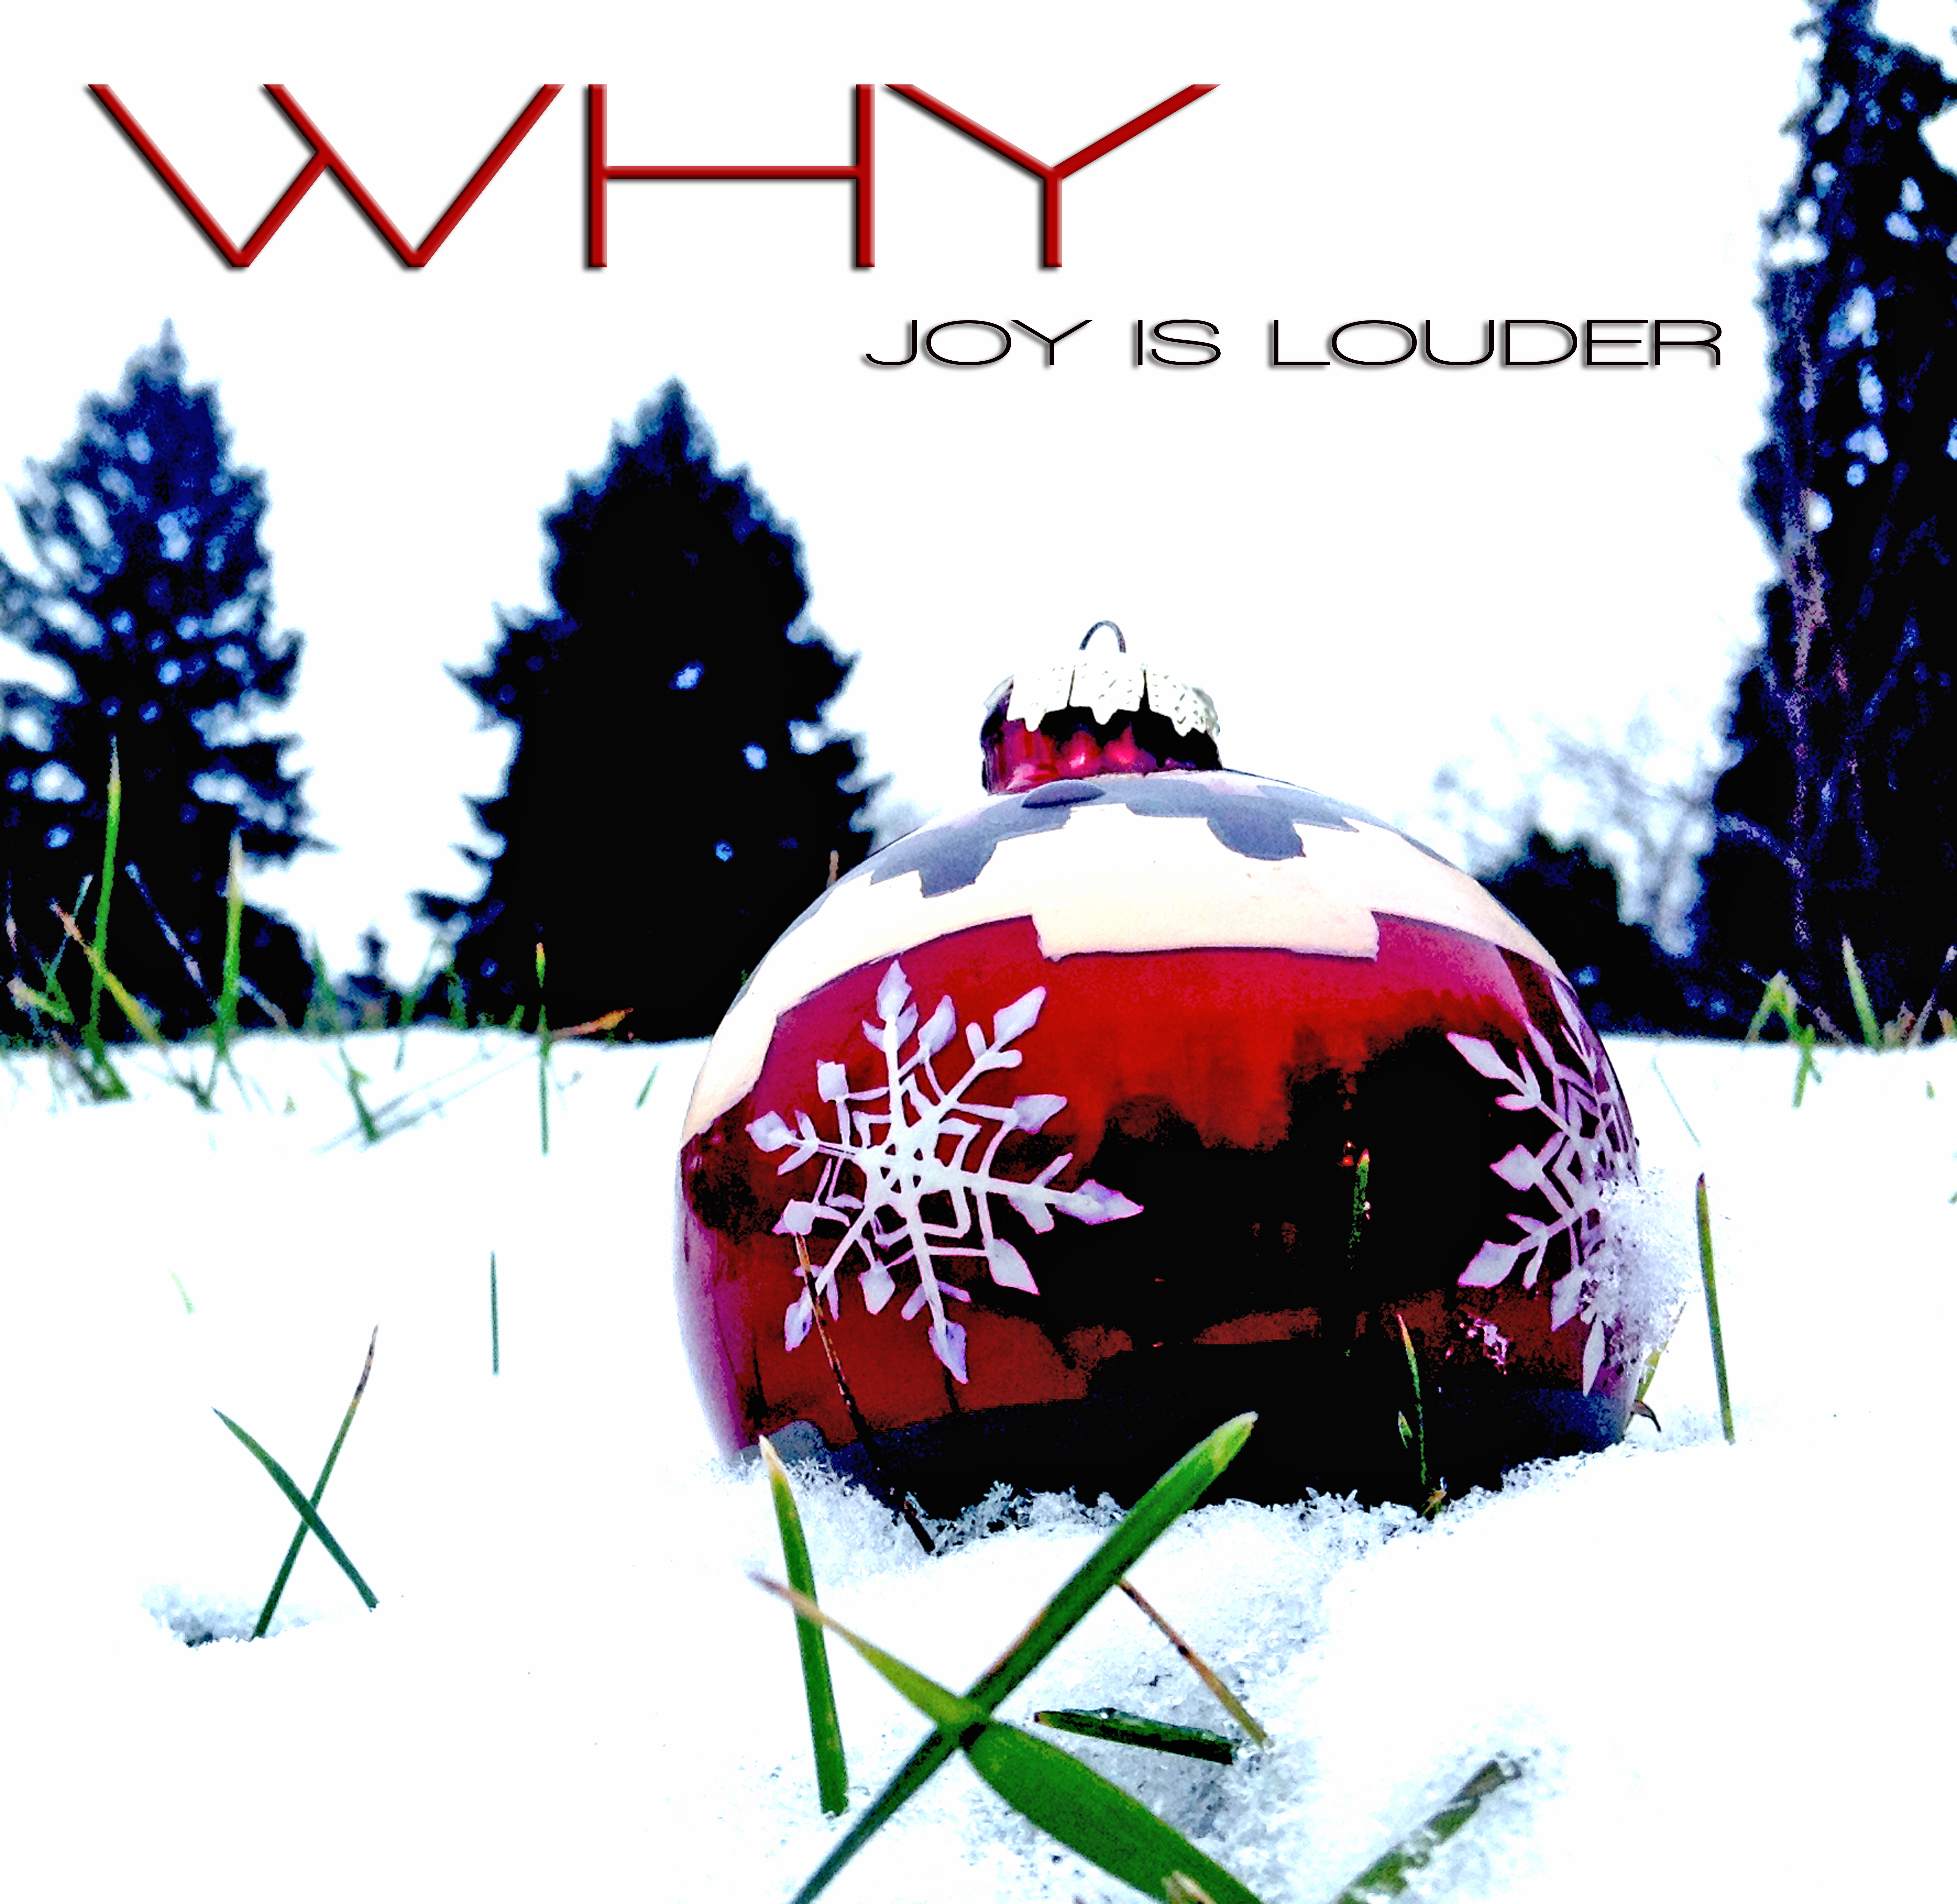 New Christmas Song “JOY IS LOUDER” on iTUNES